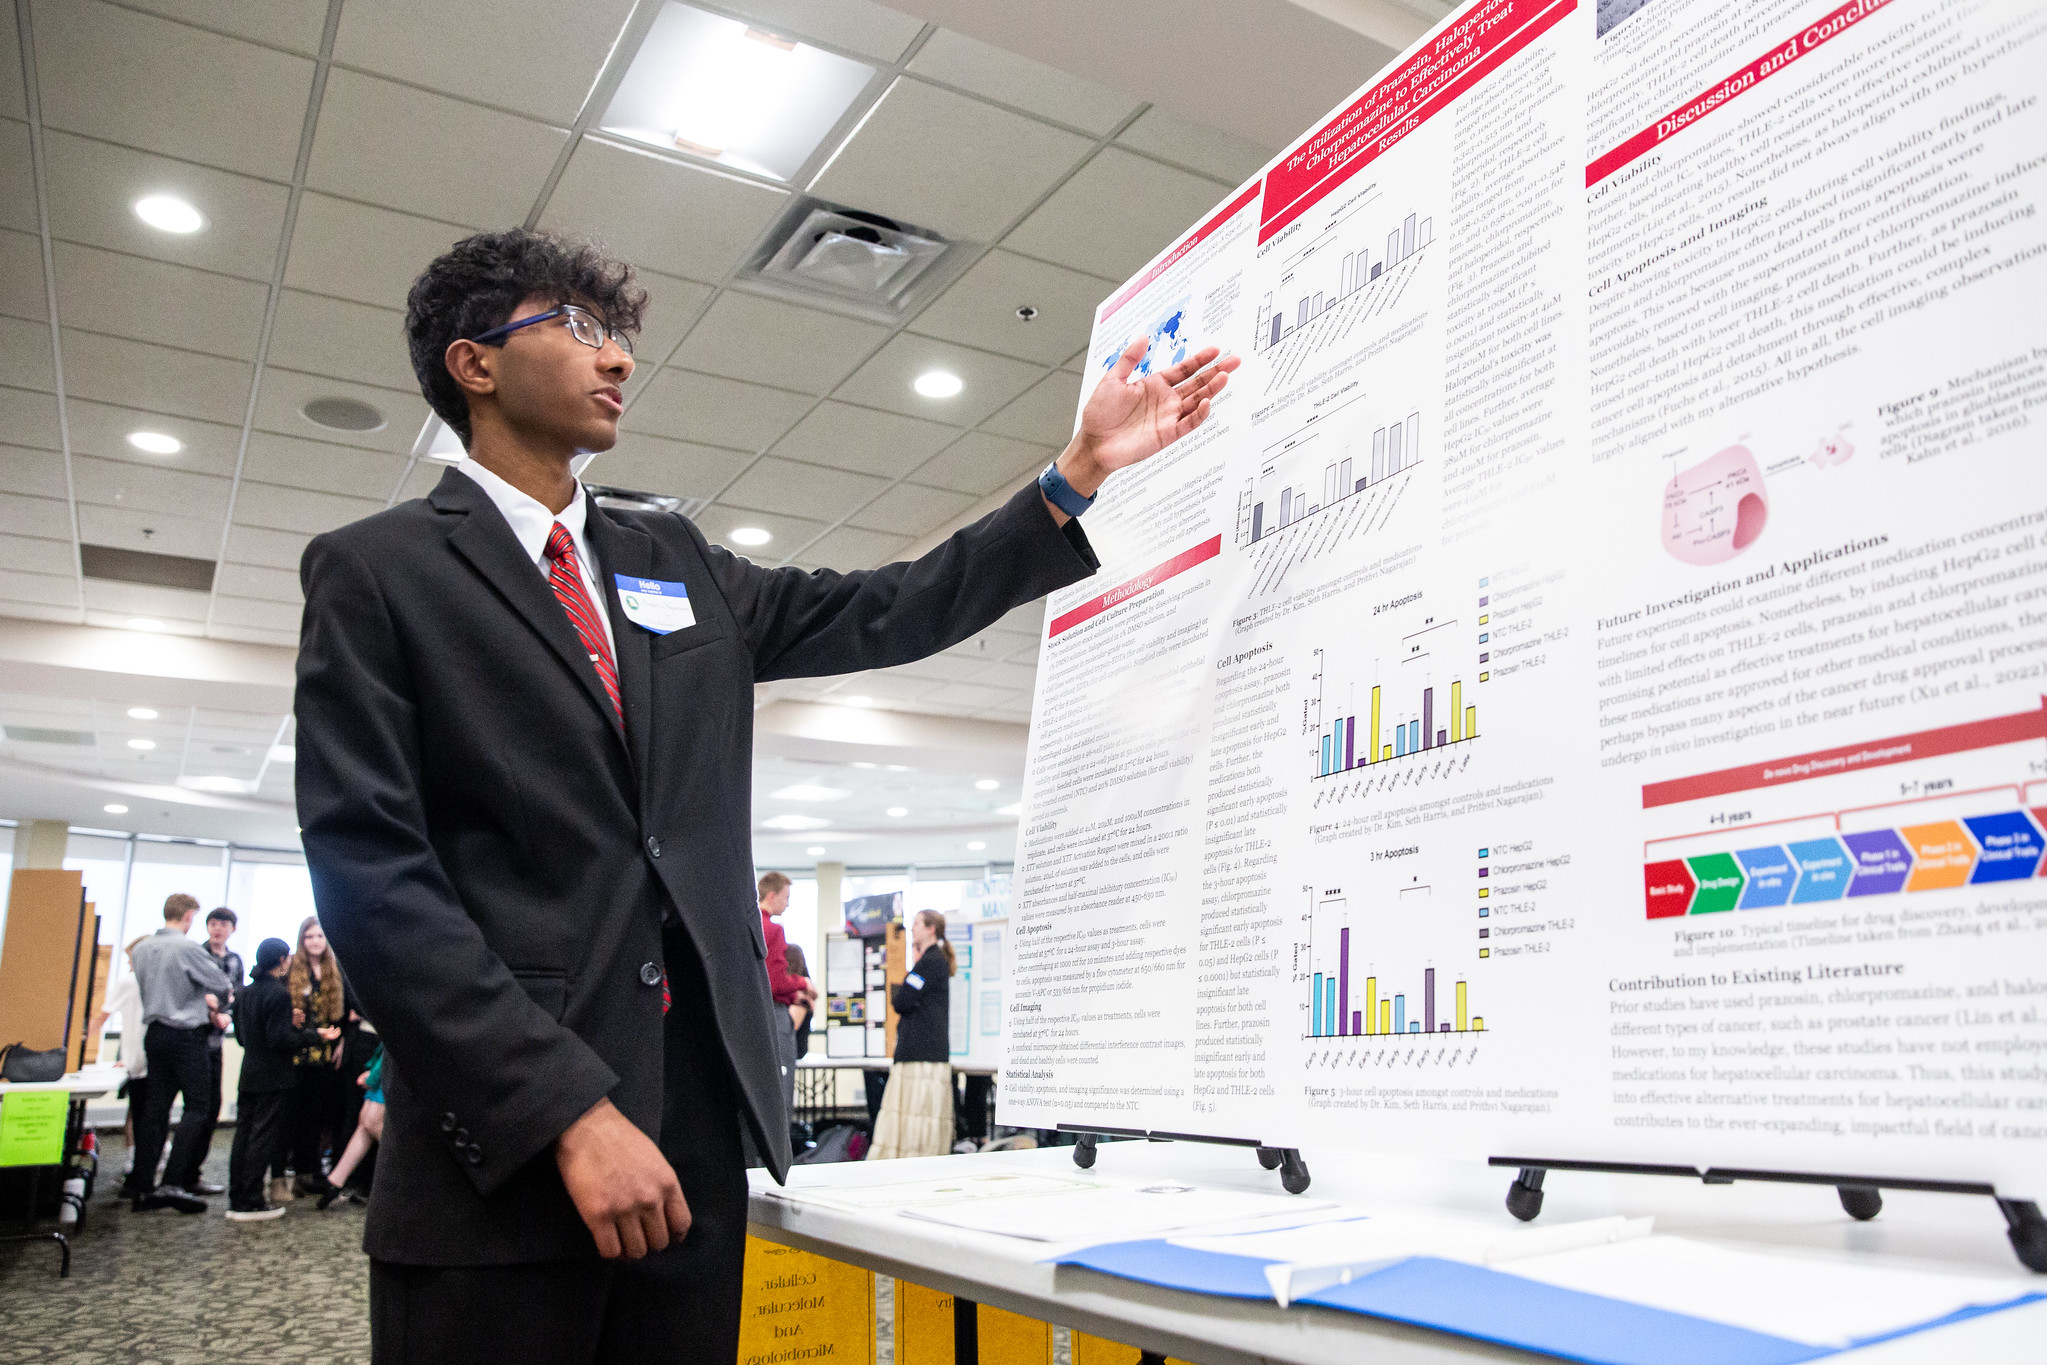 Missouri Southern to Host Annual Regional Science Fair and Missouri Junior Academy of Science Presentations